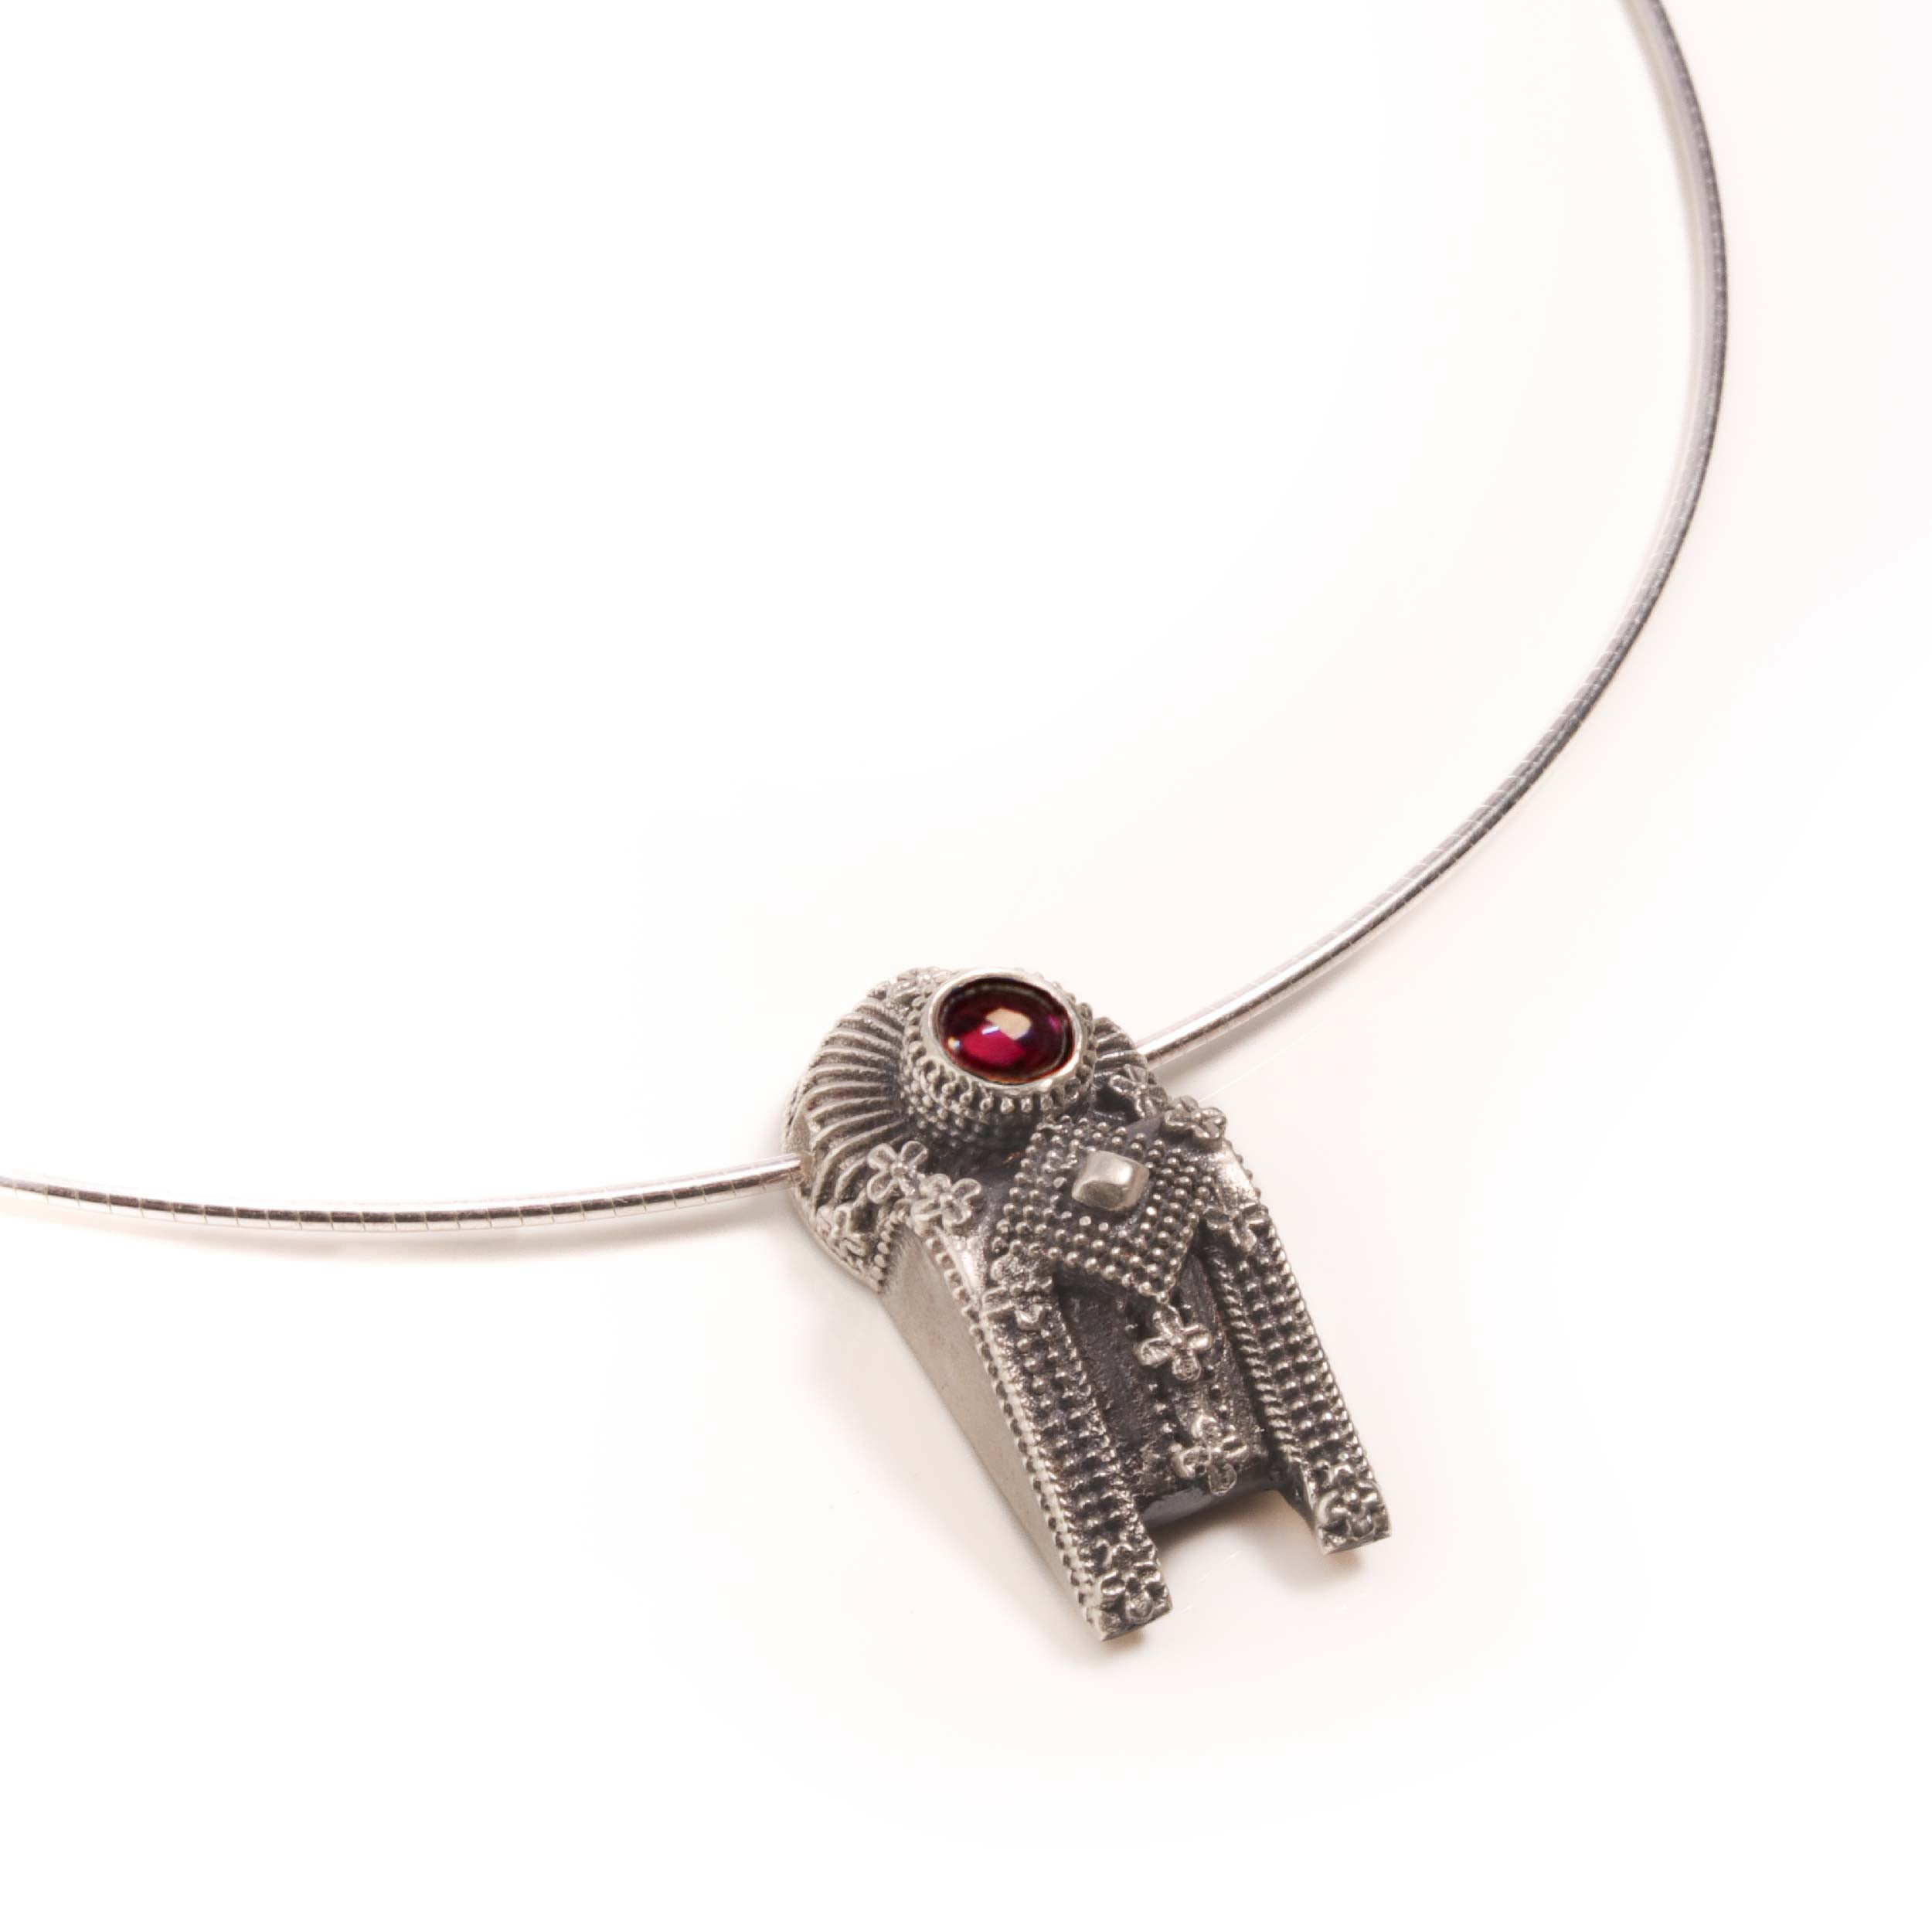 Thoppa Taali Silver Pendant Chain With Rubellite Stone by MOHA